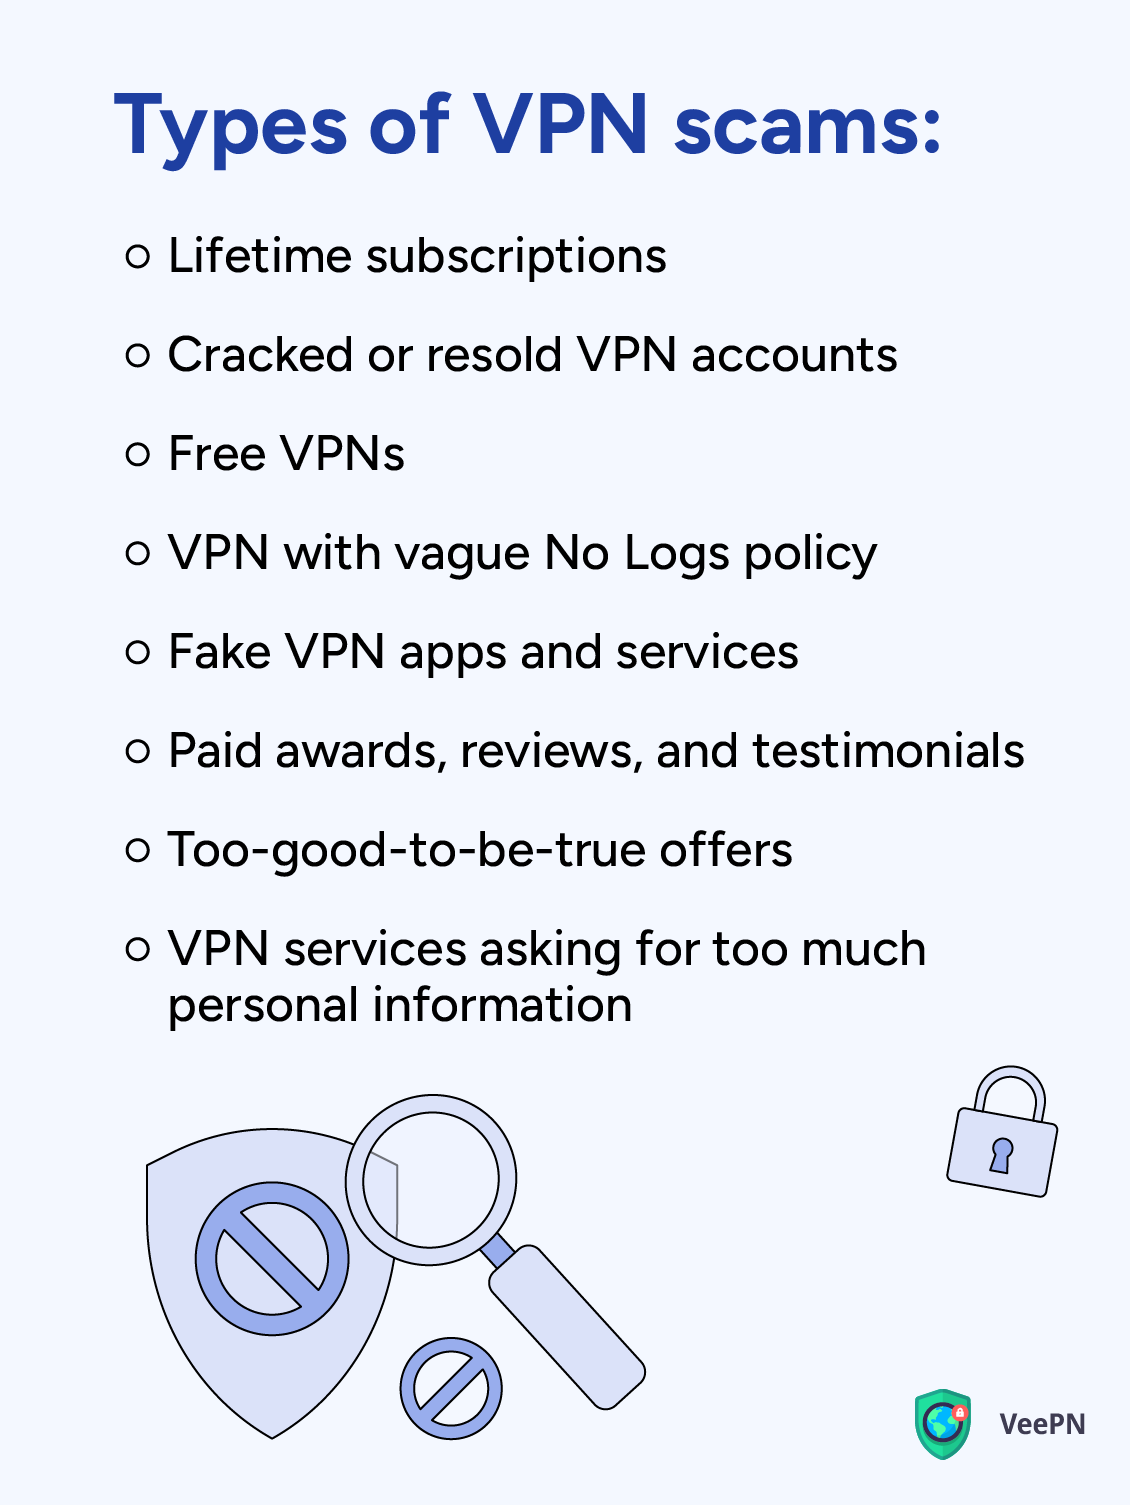 Types of VPN scams